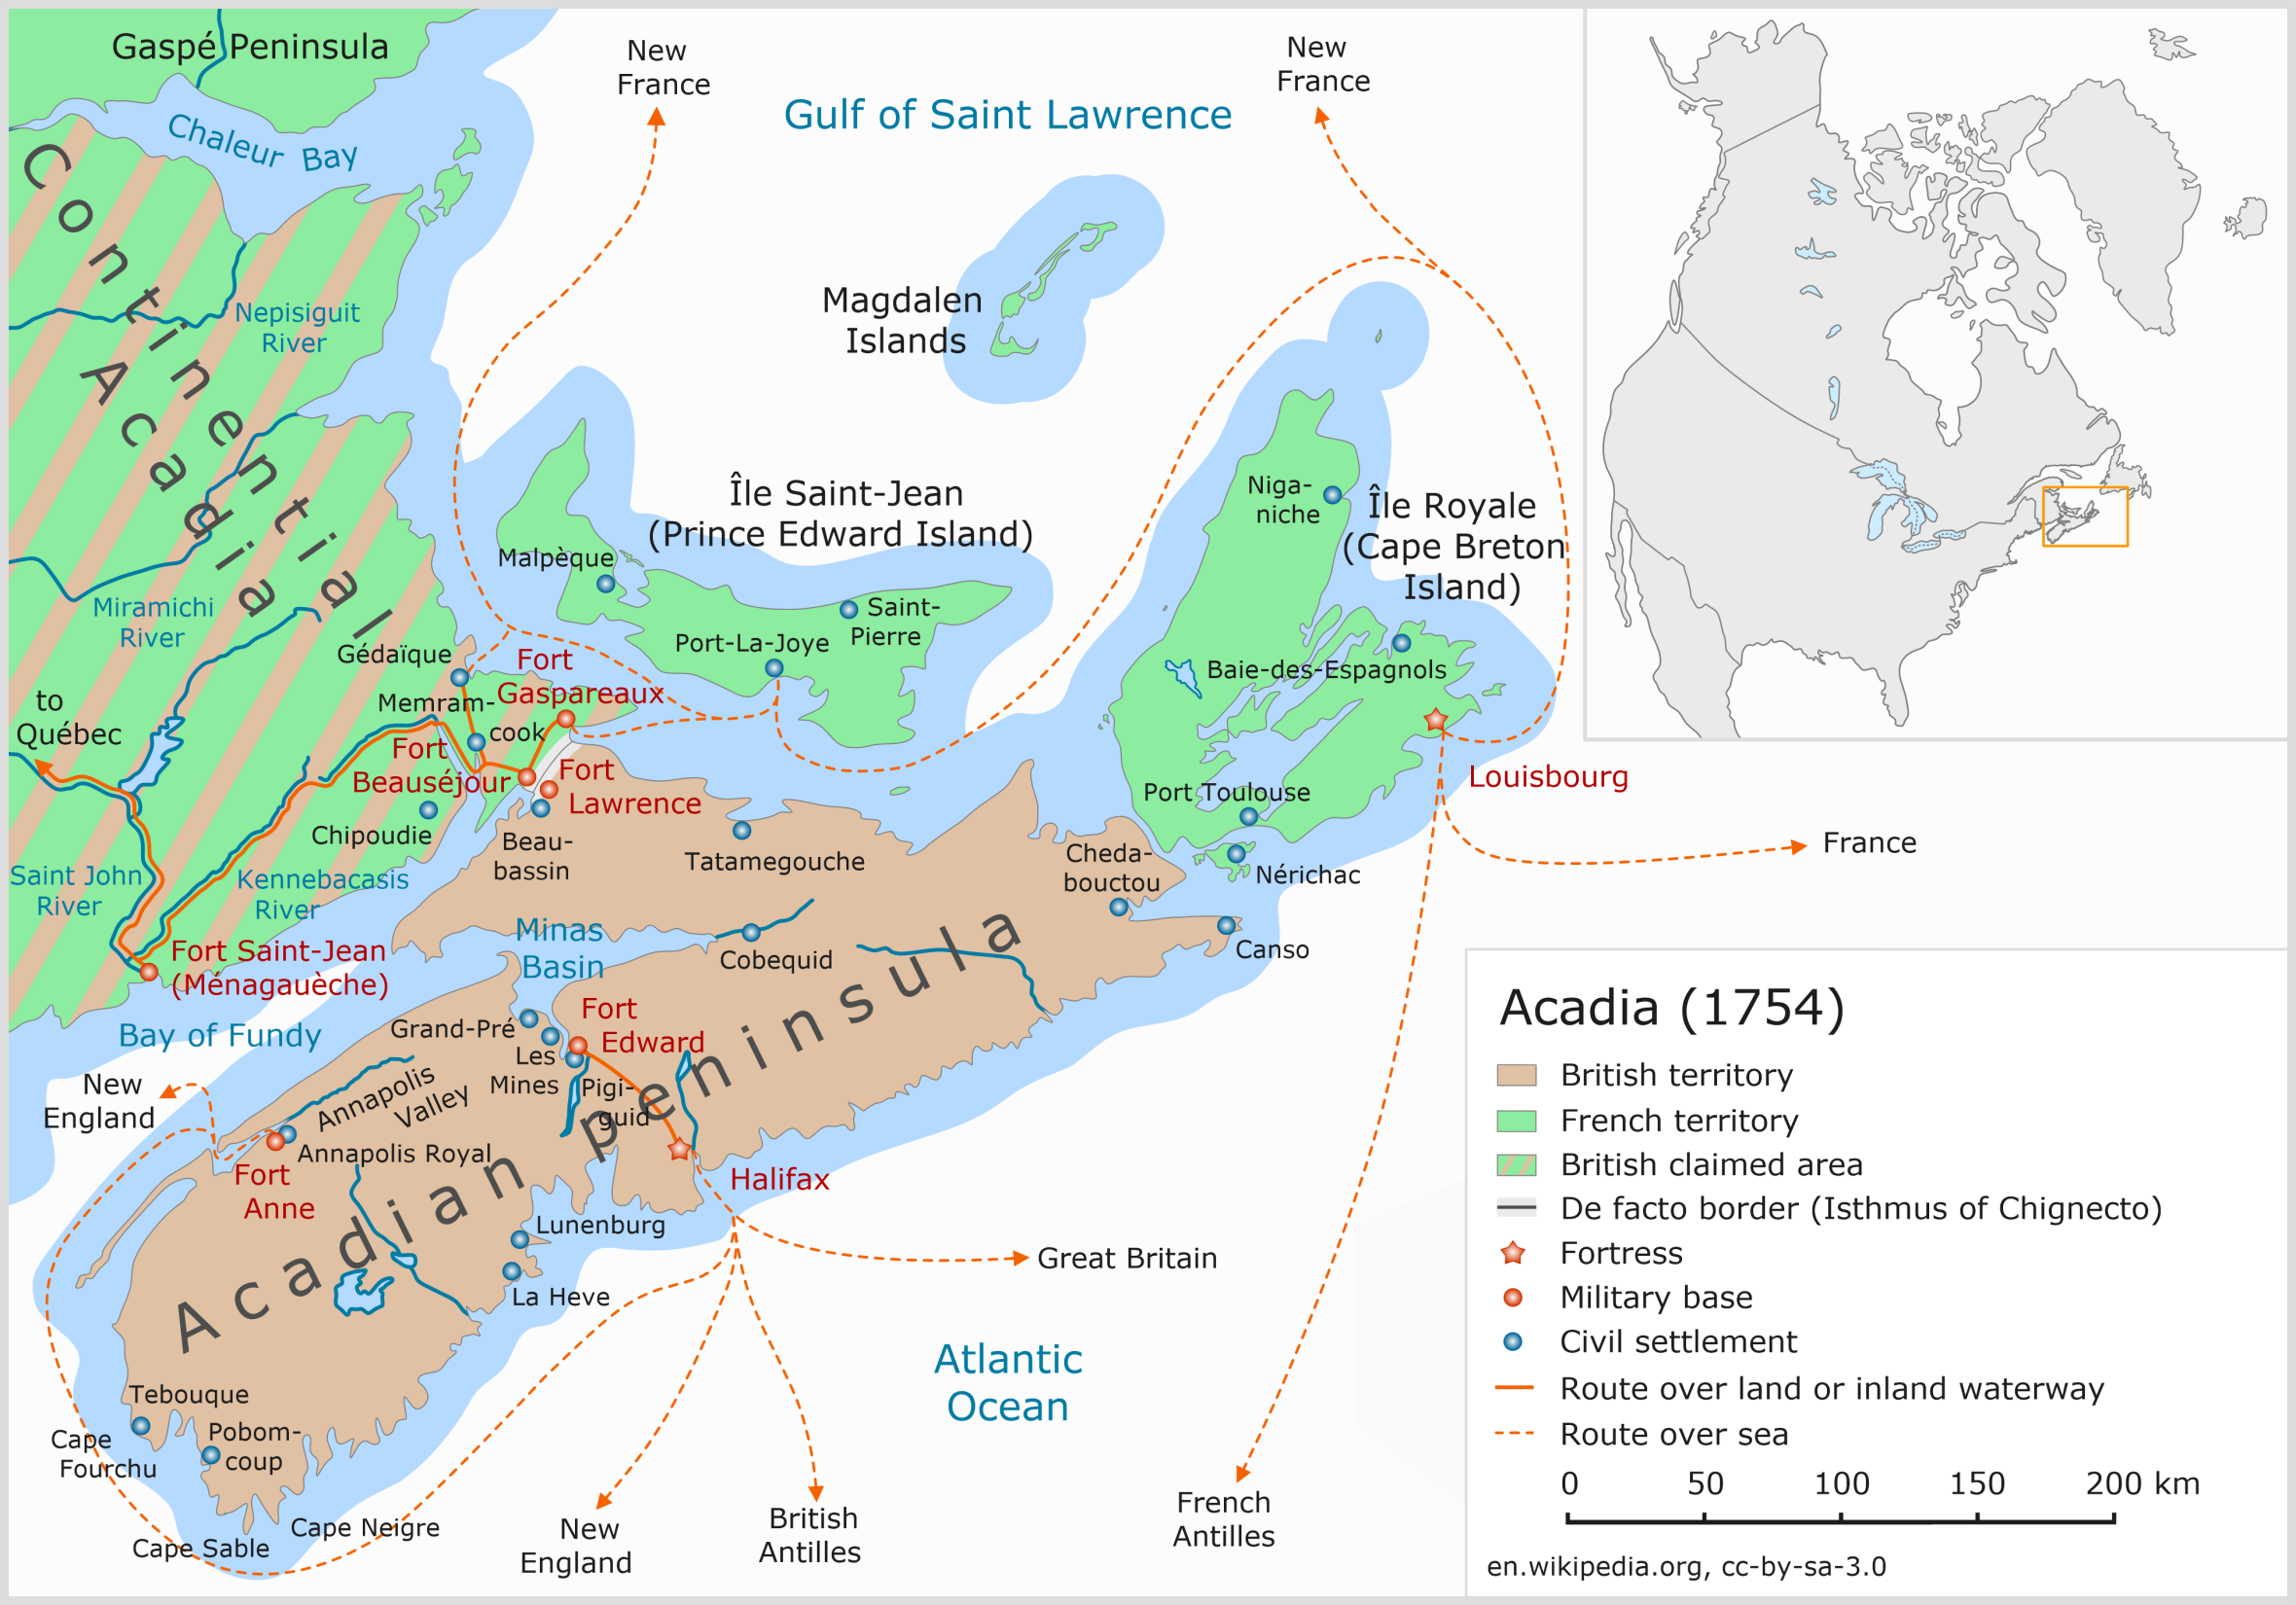 A map of Acadia and Nova Scotia in 1754. Long description available.